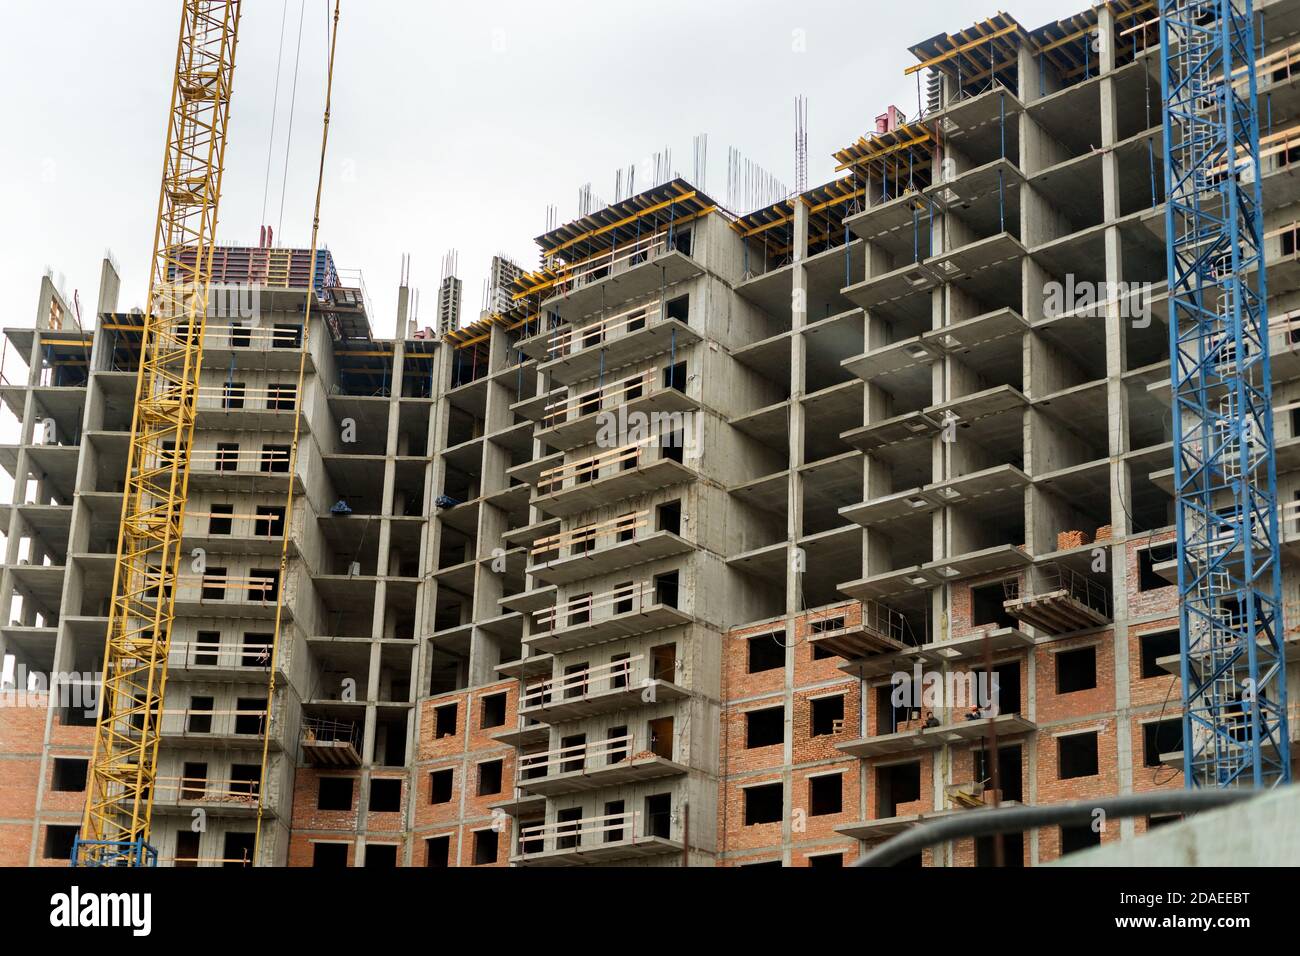 Facade of a multi-storey residential building under construction with a crane in front of it. Stock Photo